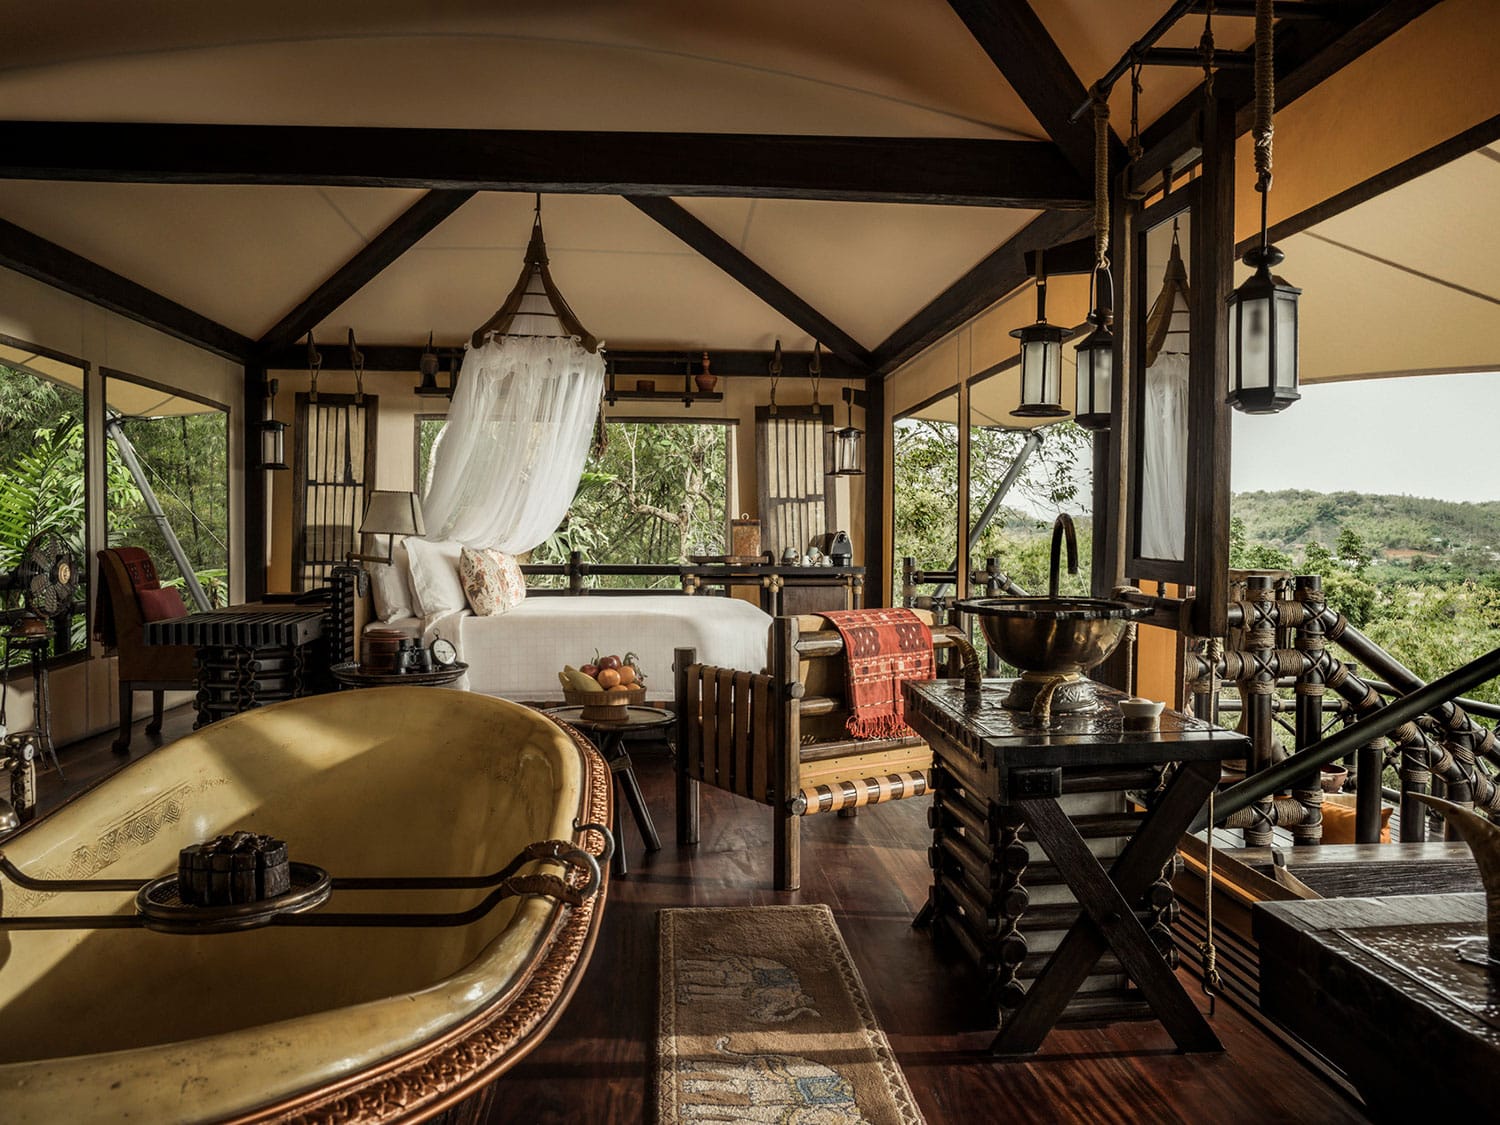 One of the tent experiences at the Four Seasons Tented Camp, Golden Triangle, in Thailand.